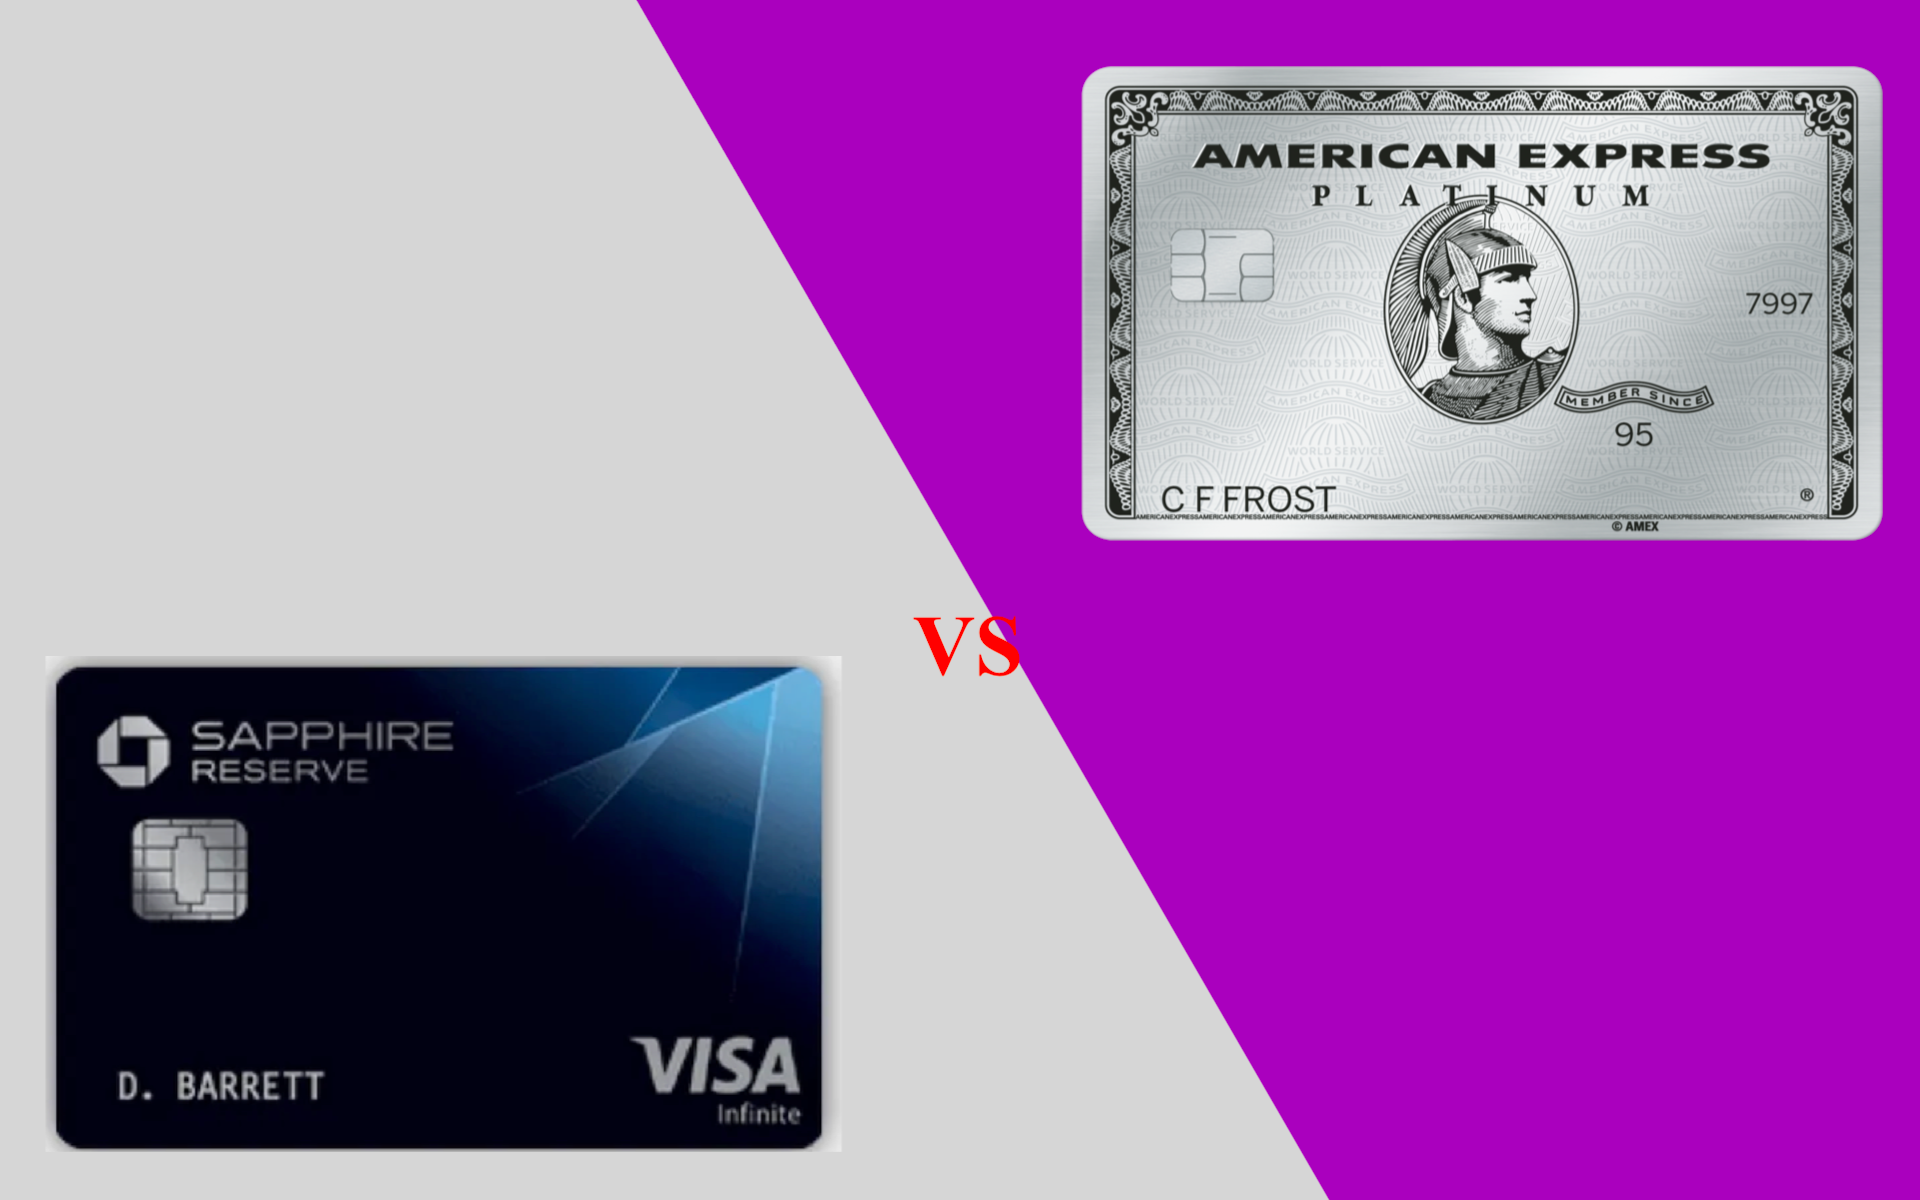 Chase Sapphire Reserve vs Amex Platinum: Which Is The Better Credit Card?